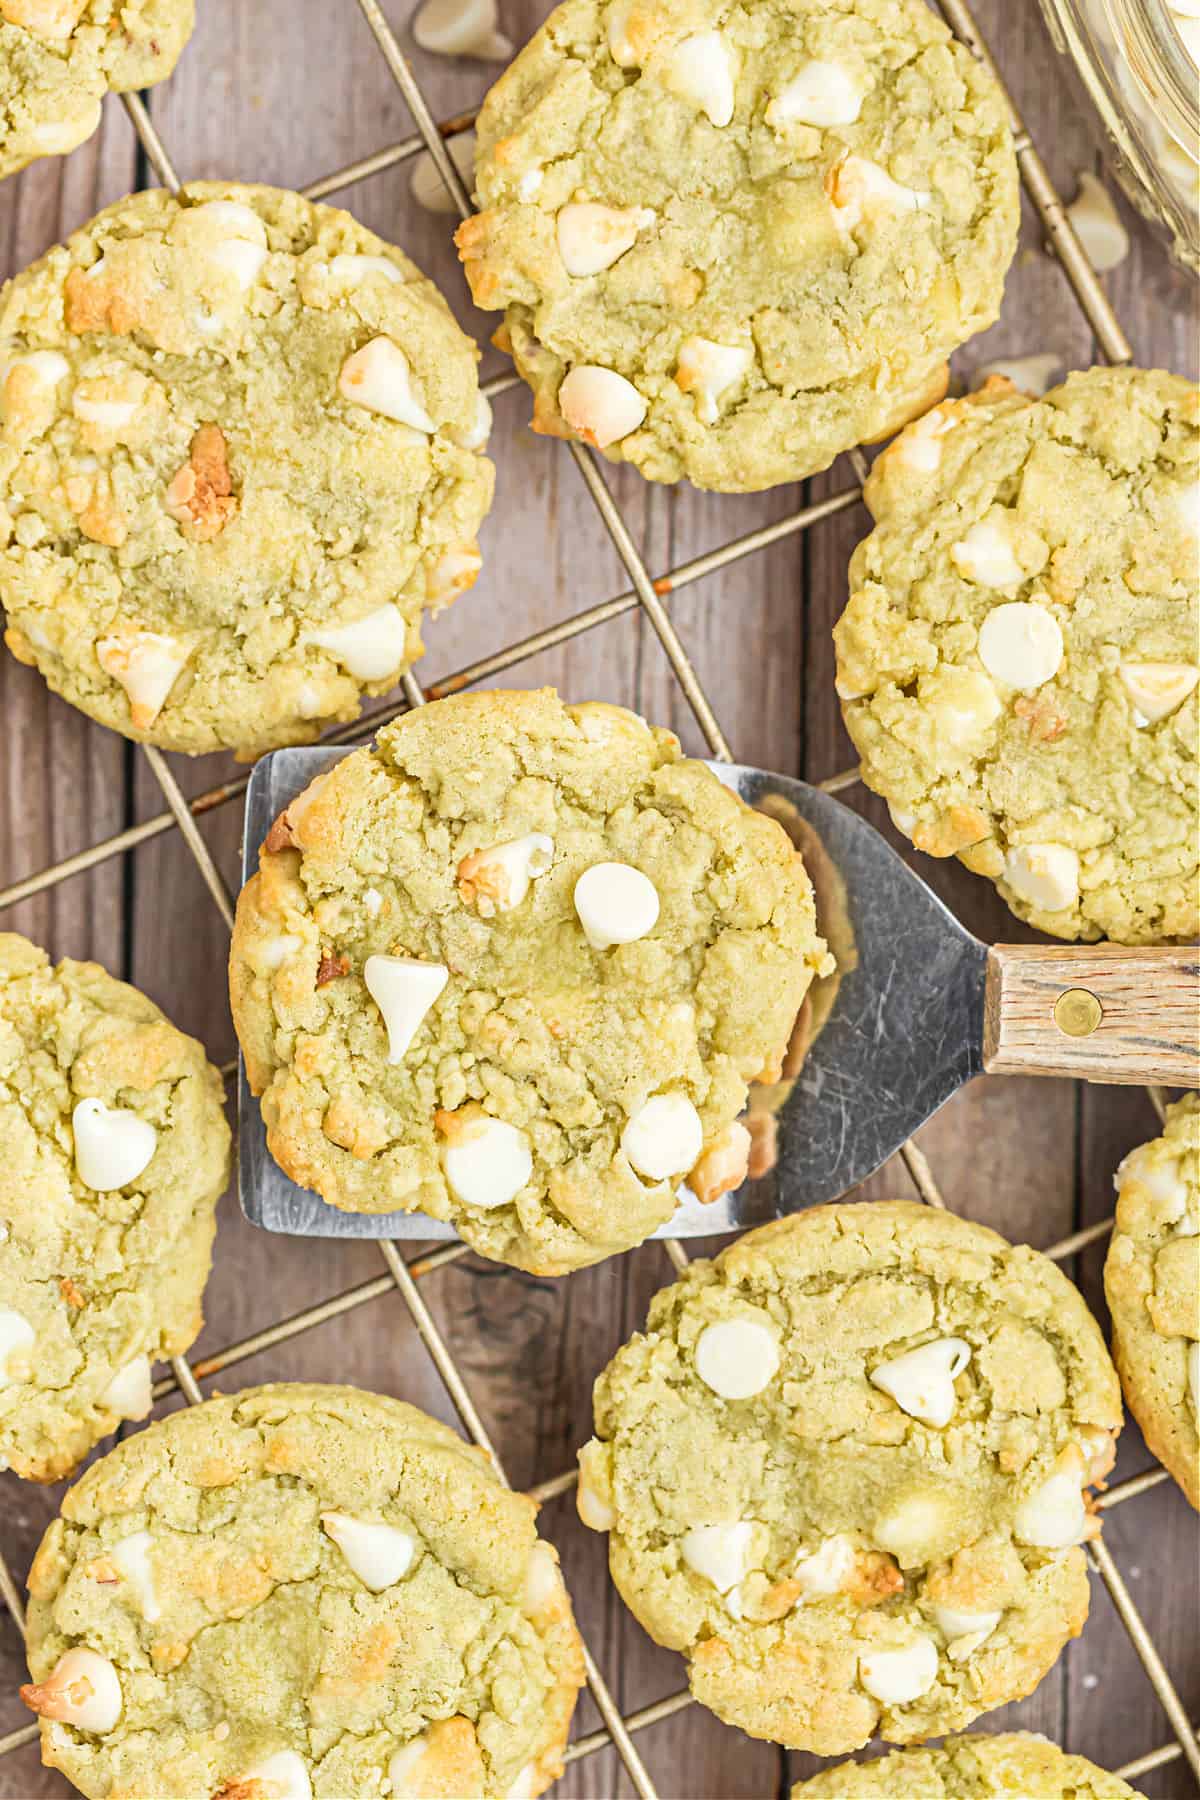 Pistachio cookies with white chocolate chips on a wire cooling rack.